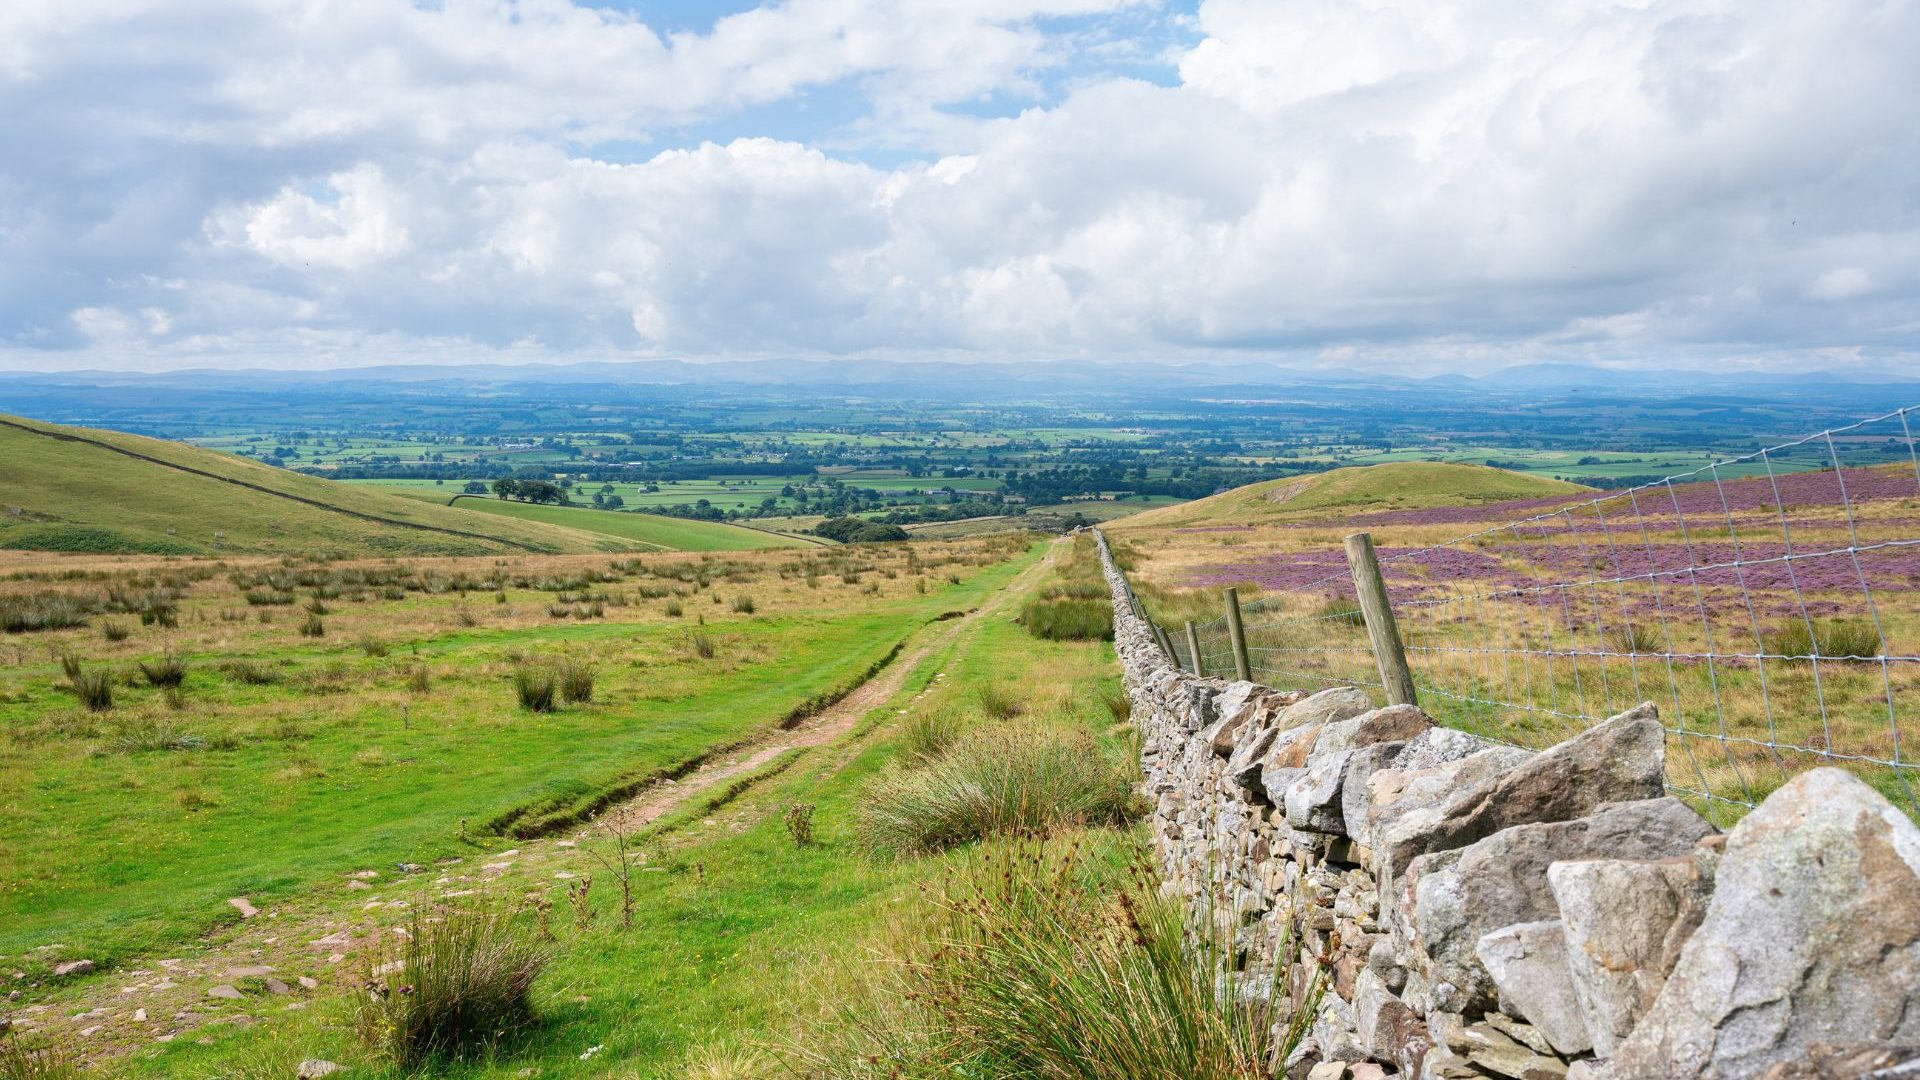 Walking path through the green grassy hills of the Pennine Way National Trail in Cumbria